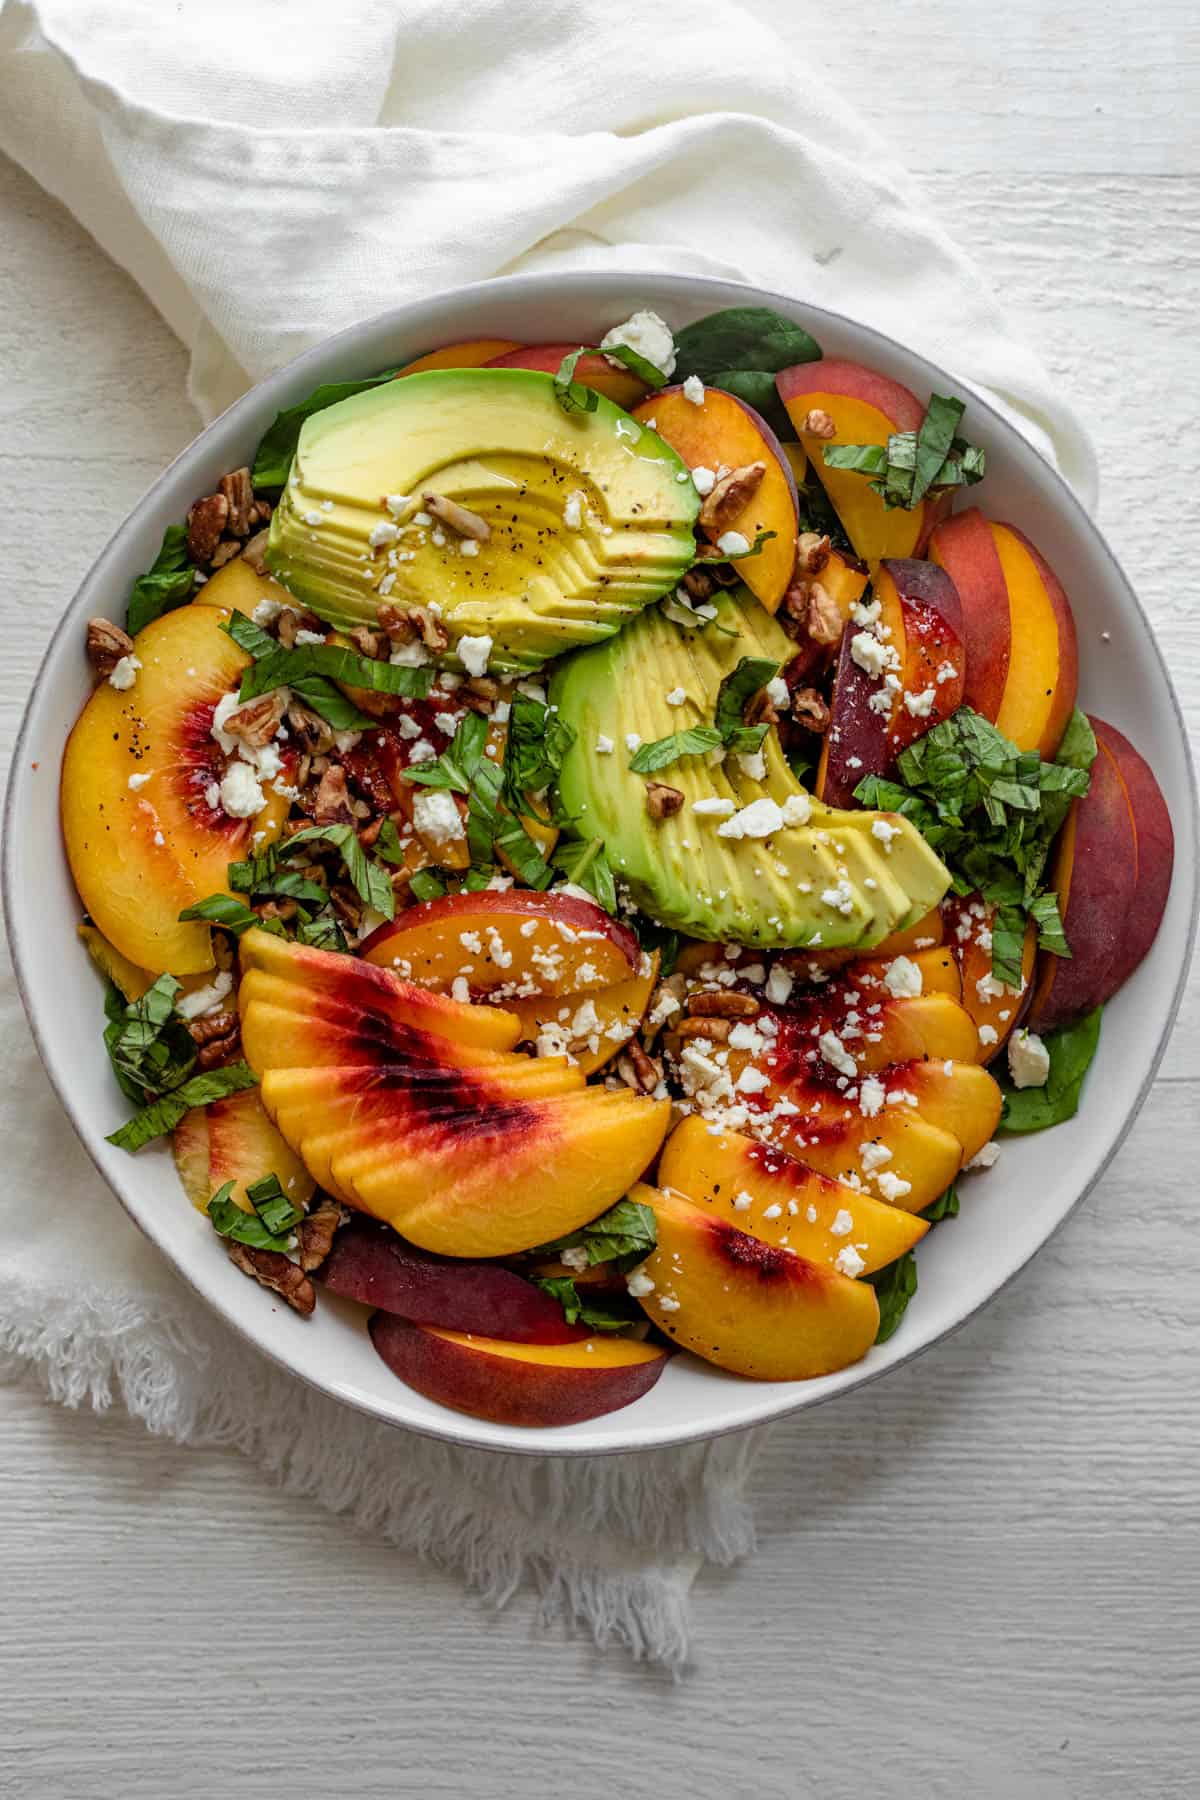 Large bowl of peach salad with sliced avocados